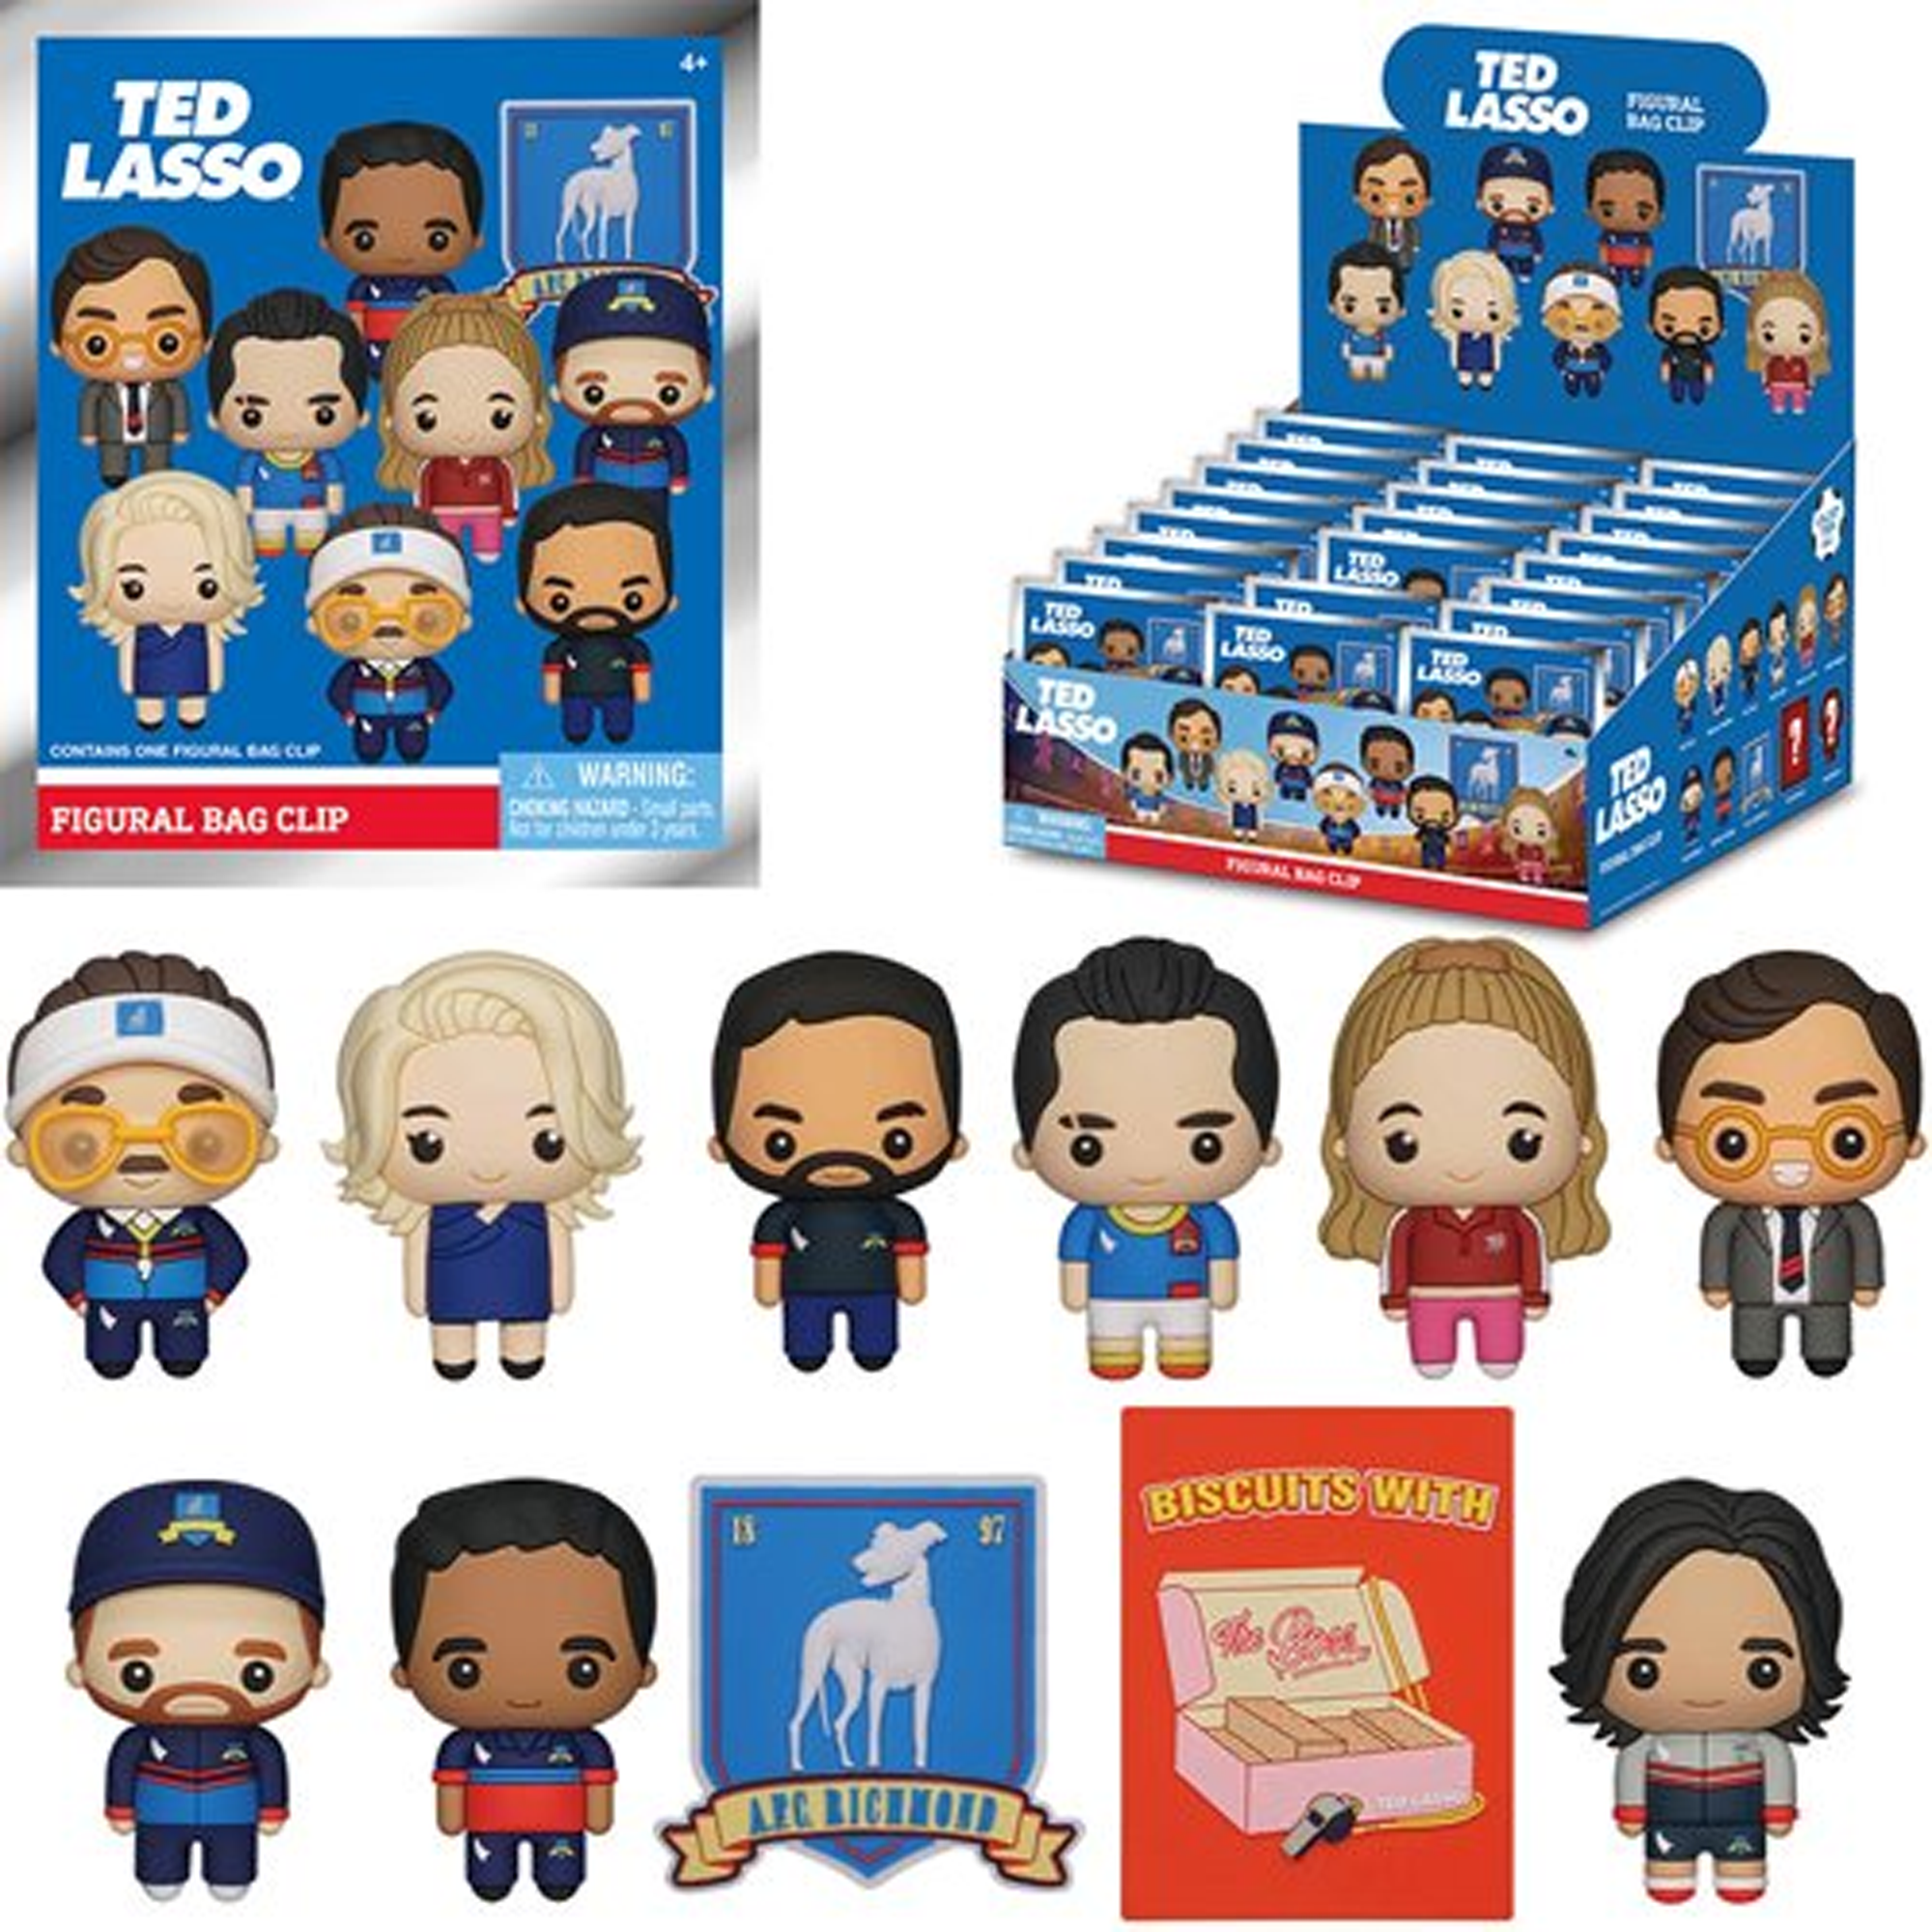 Ted Lasso Pops!!!!! R/funkopop, 46% OFF